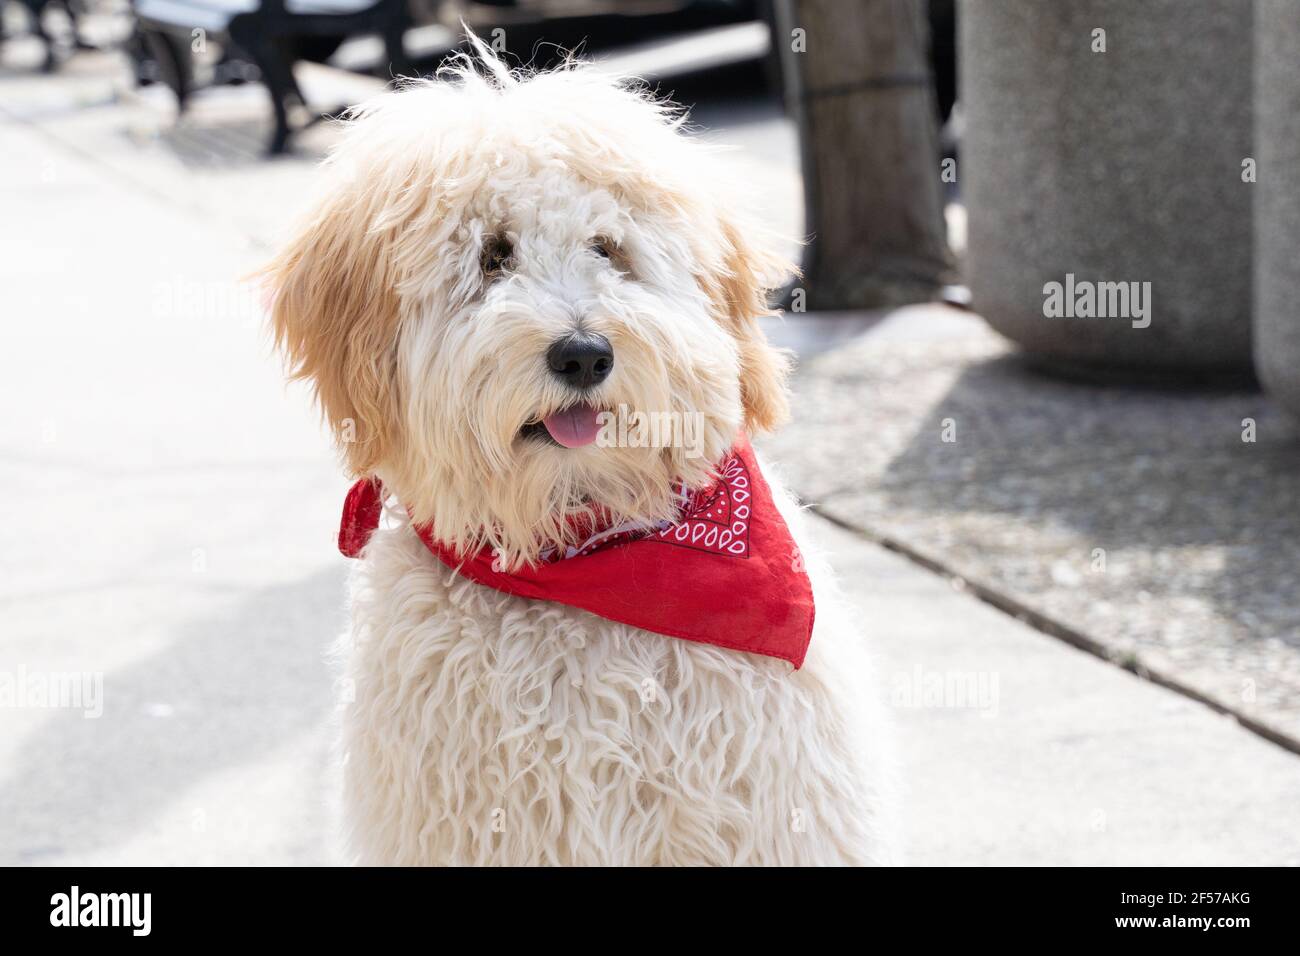 Adorable labradoodle wearing a red scarf says hello. Stock Photo